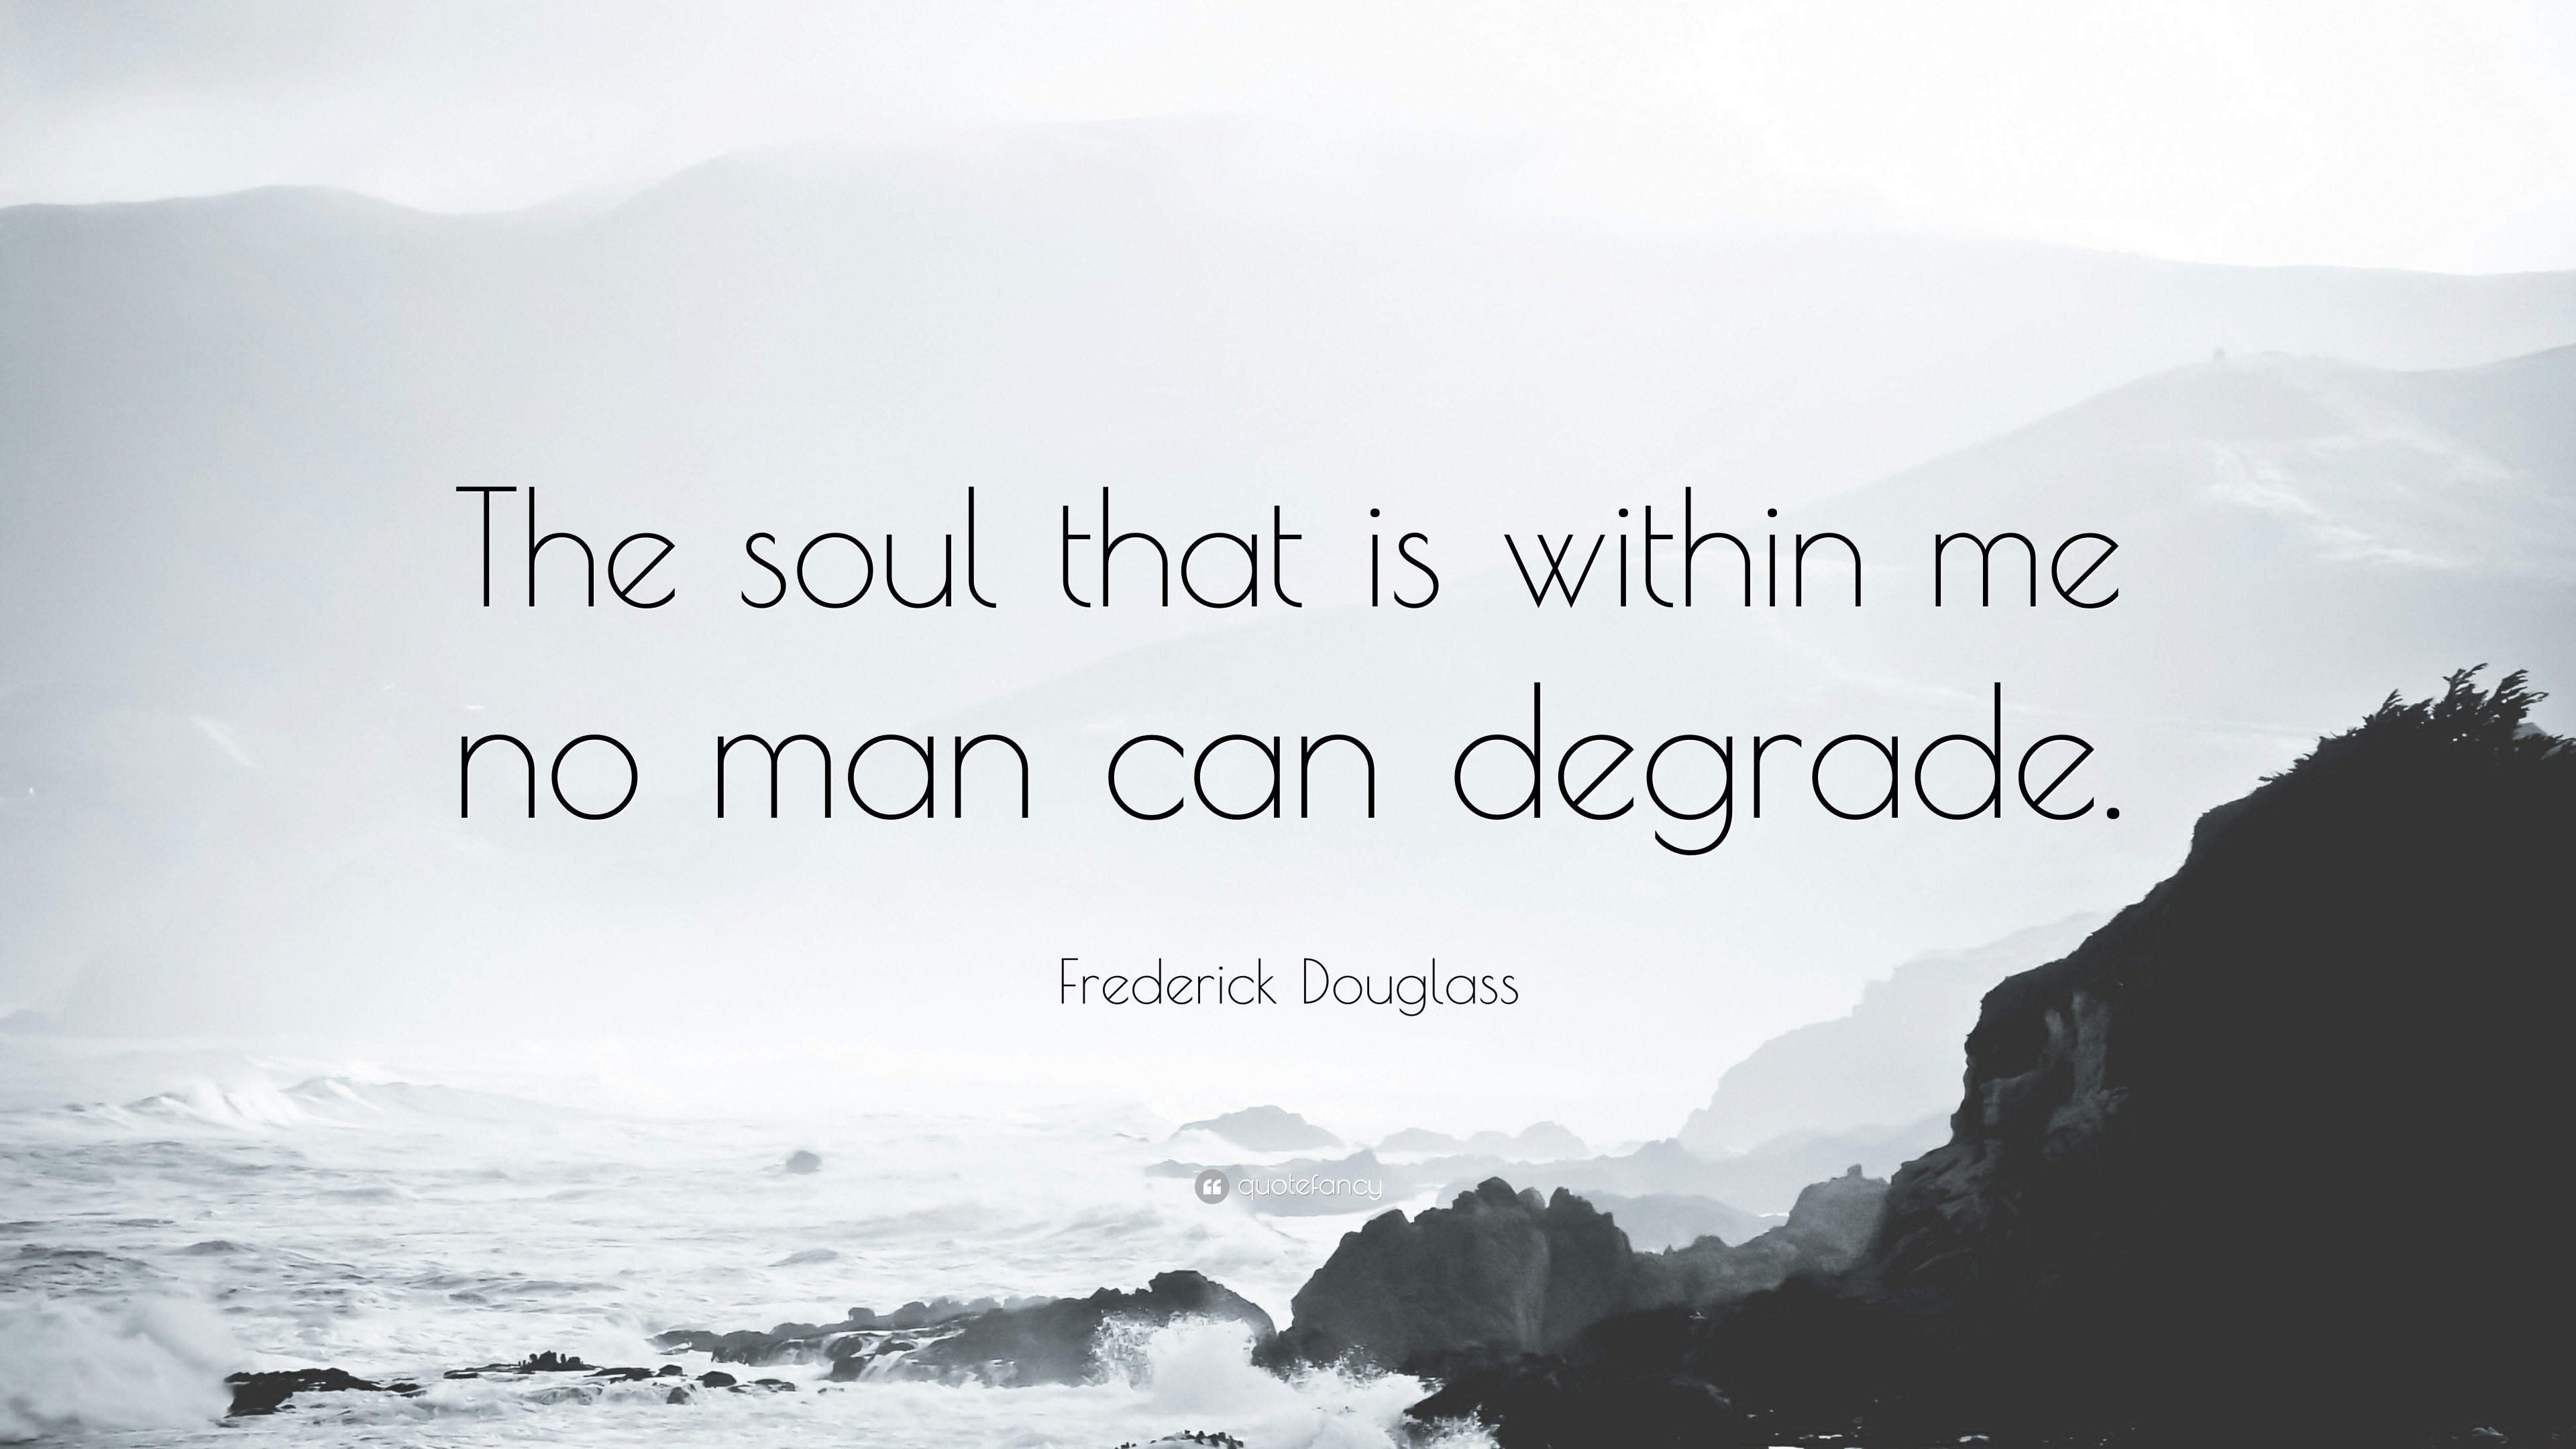 Frederick Douglass Quote: “The soul that is within me no man can degrade.”